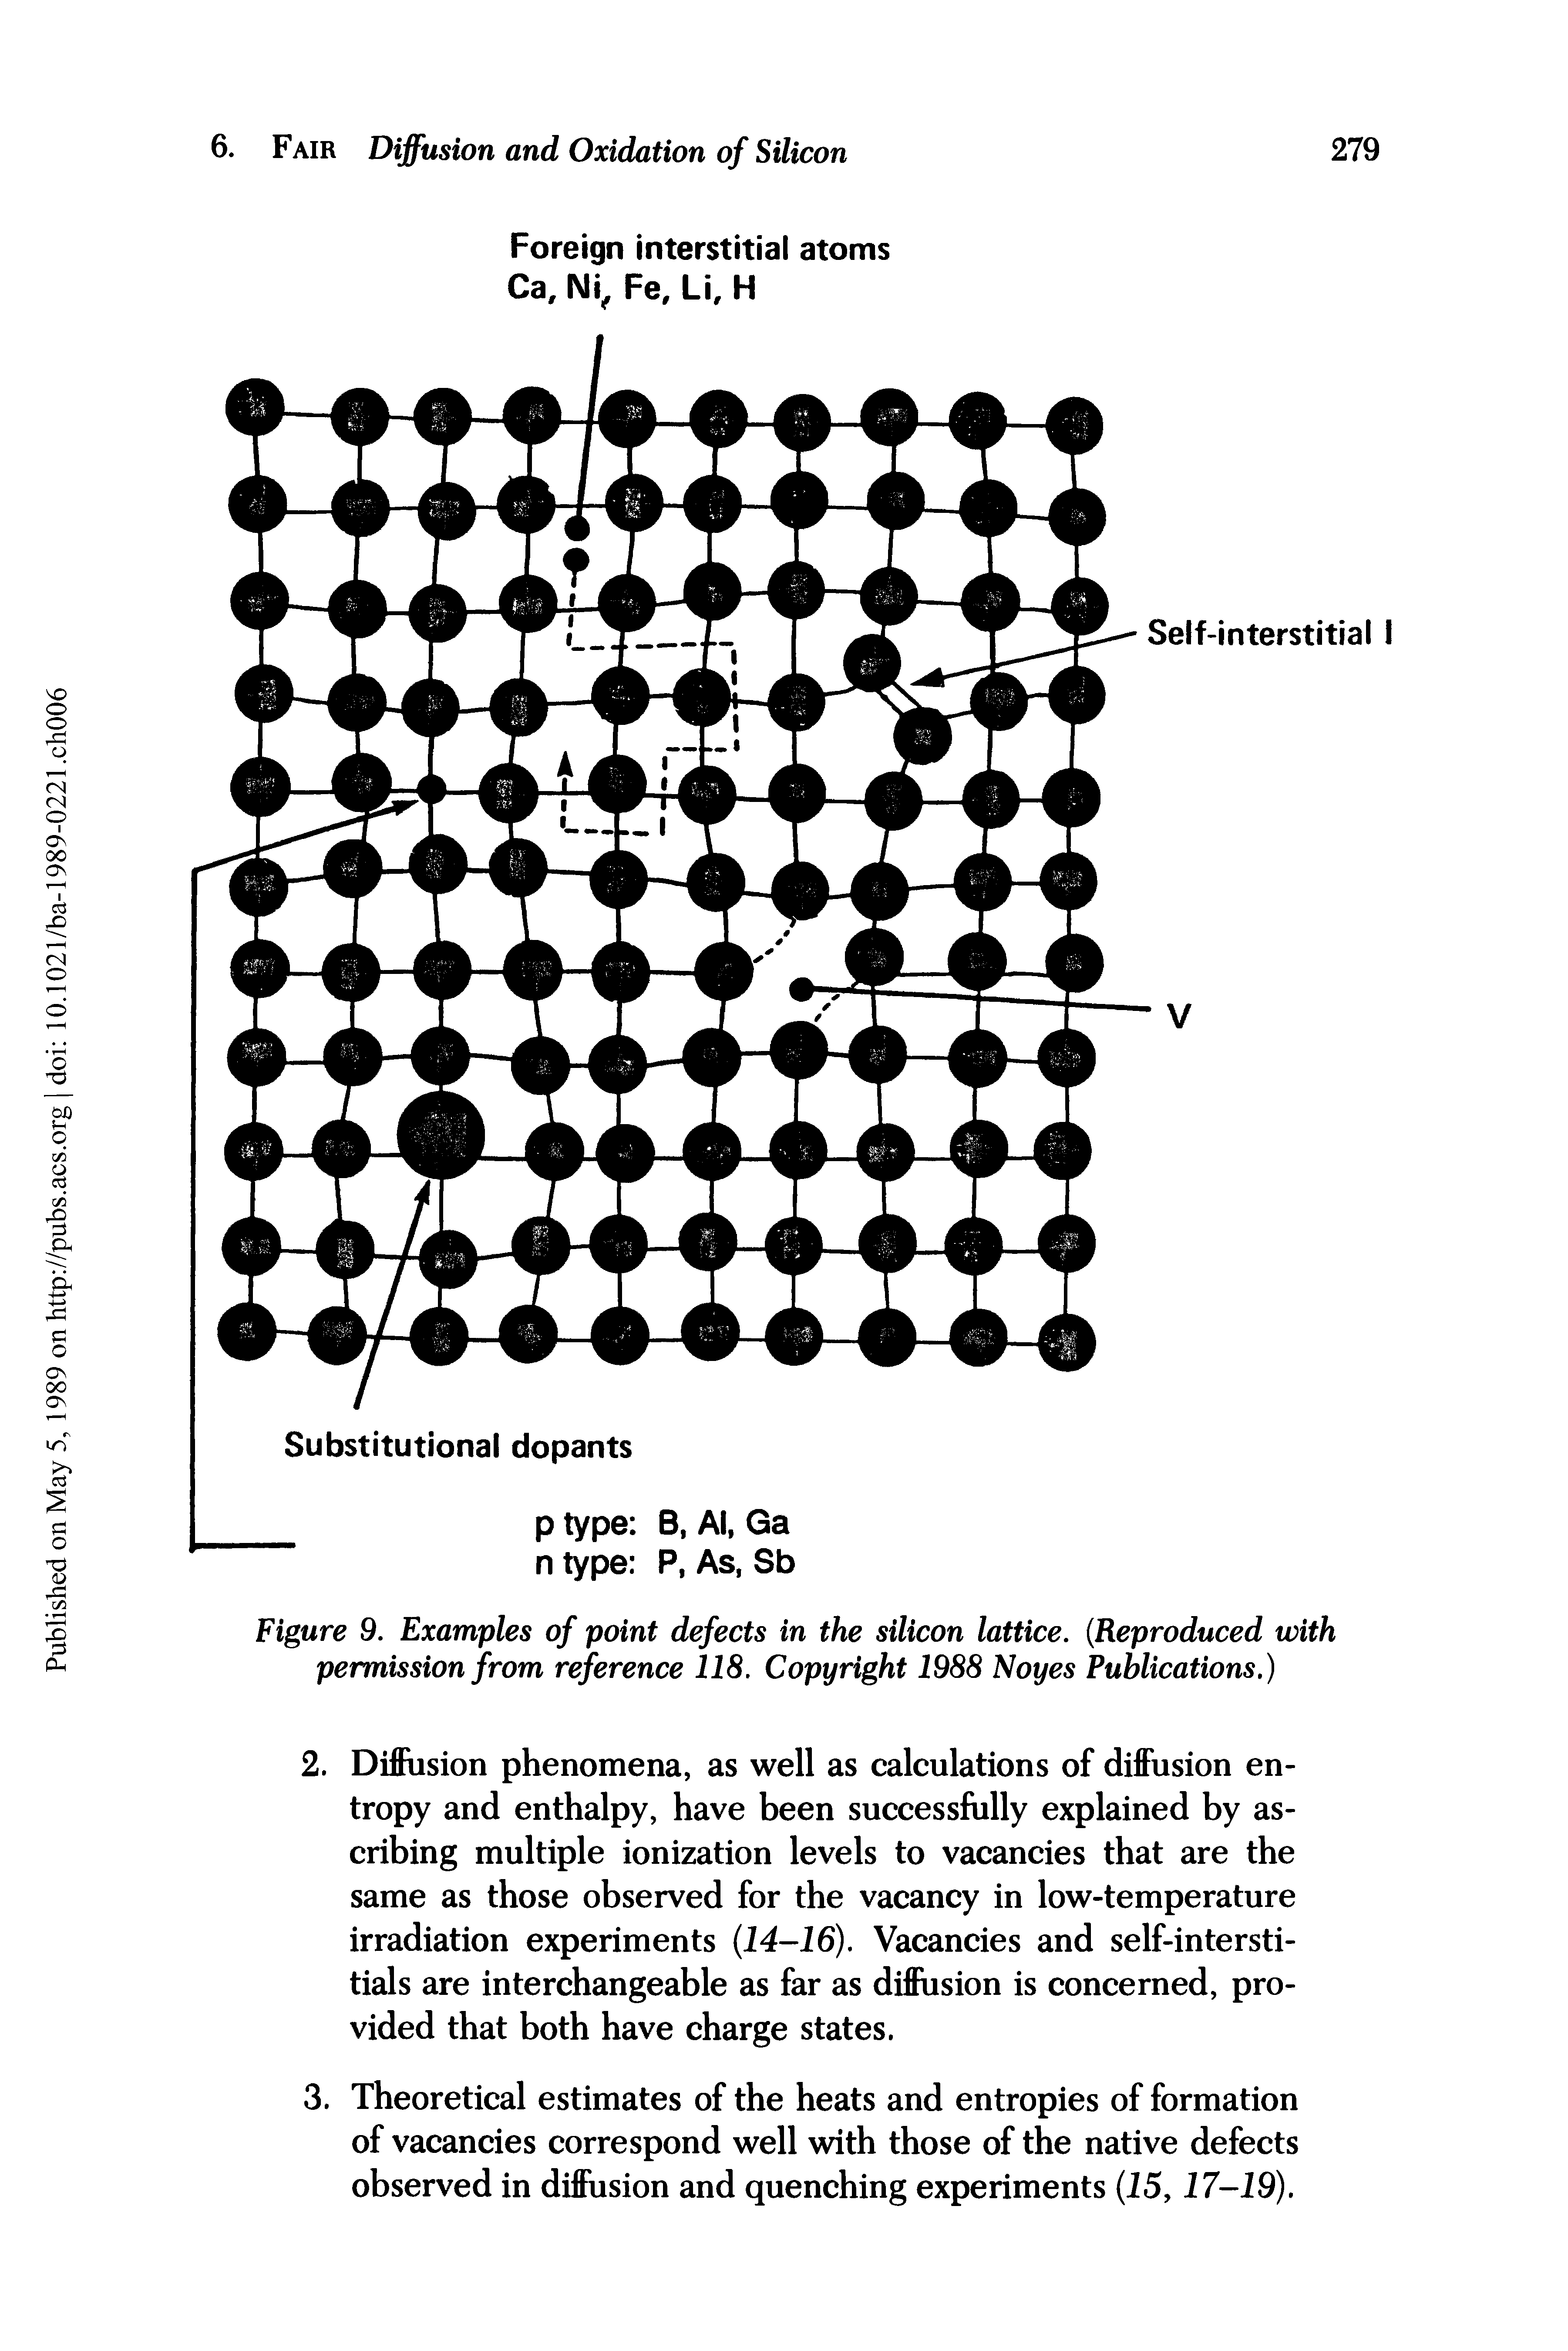 Figure 9. Examples of point defects in the silicon lattice. (Reproduced with permission from reference 118. Copyright 1988 Noyes Publications.)...